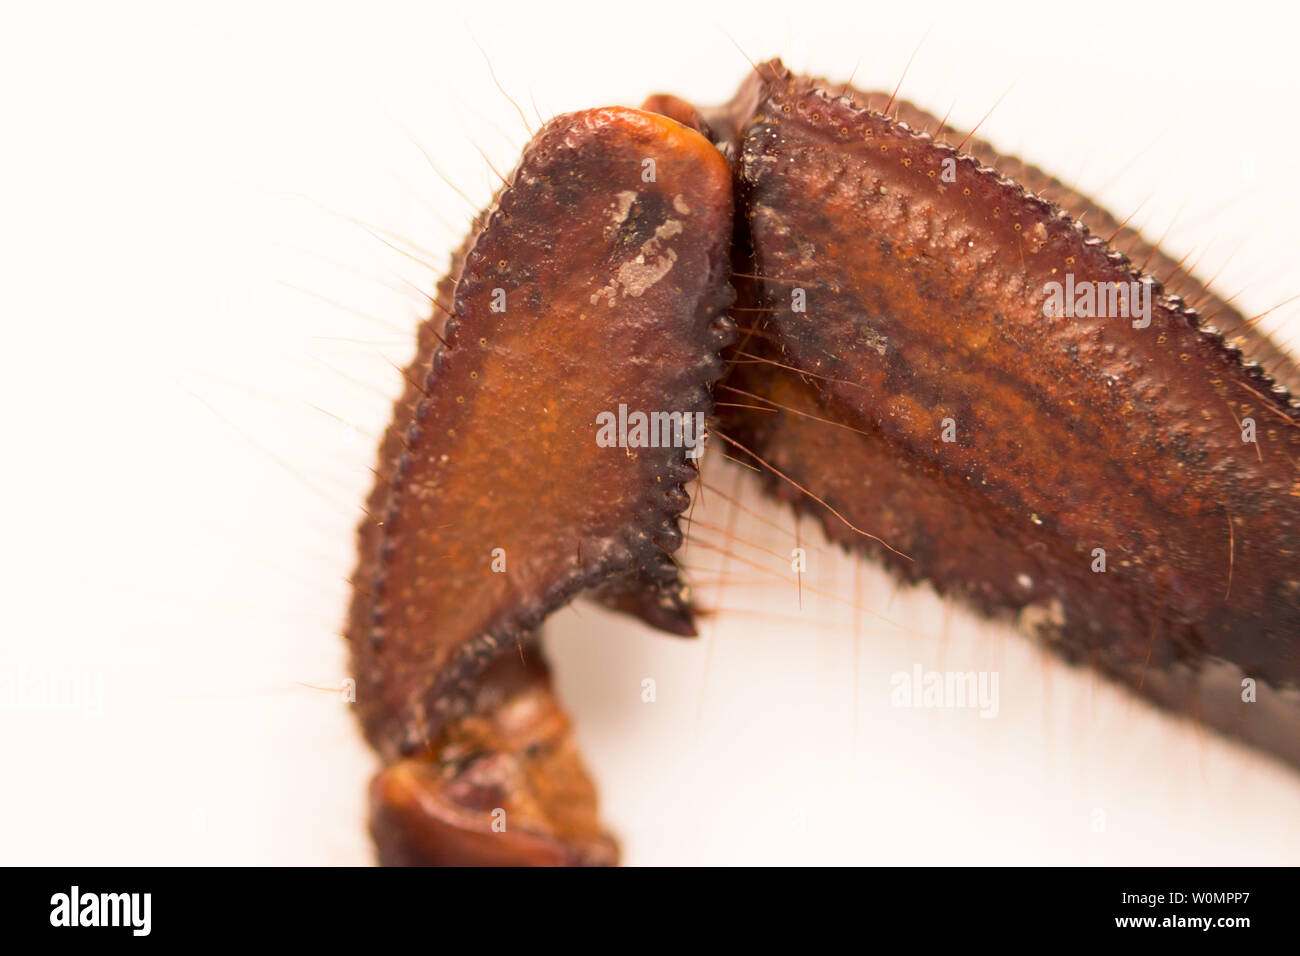 Scorpion is a detachment of arthropods from the class Arachnida. view foot joint, macro Stock Photo